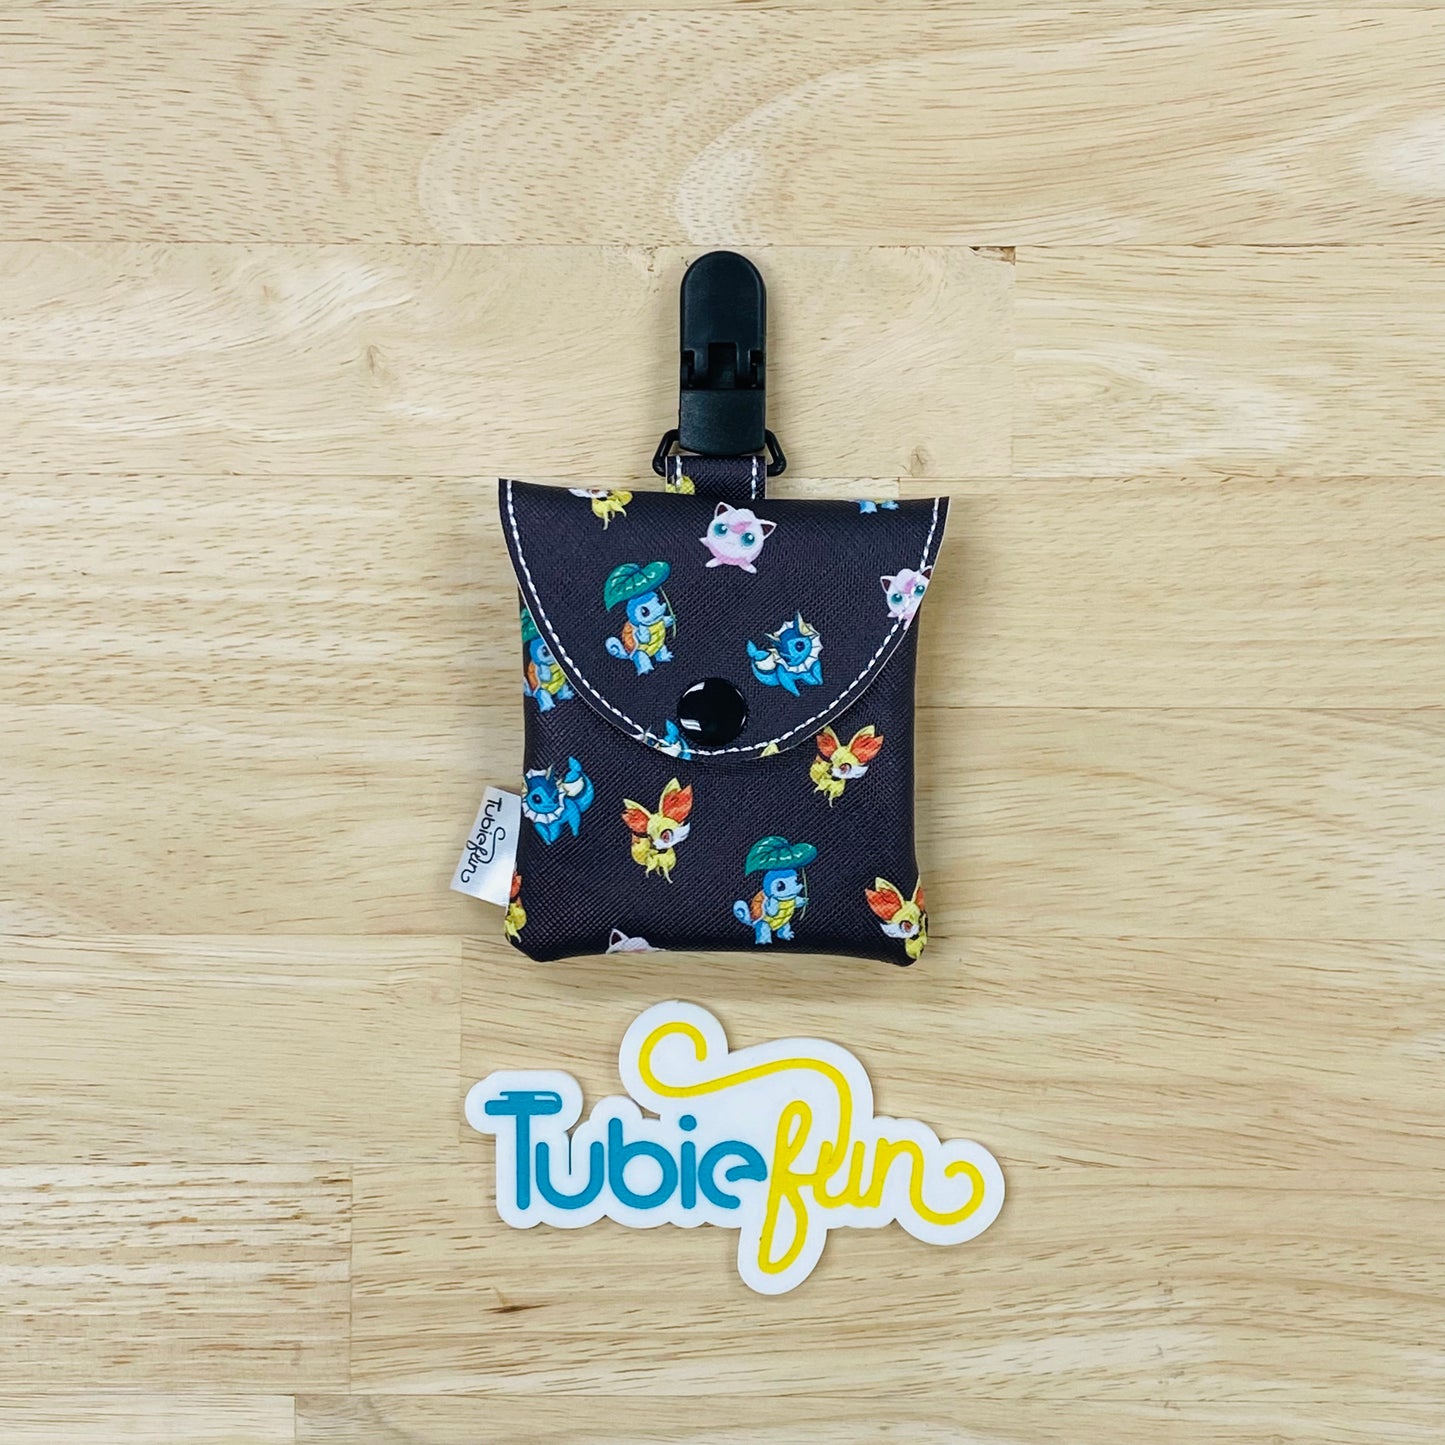 Tubing Pouch - Pocket Monsters on Black